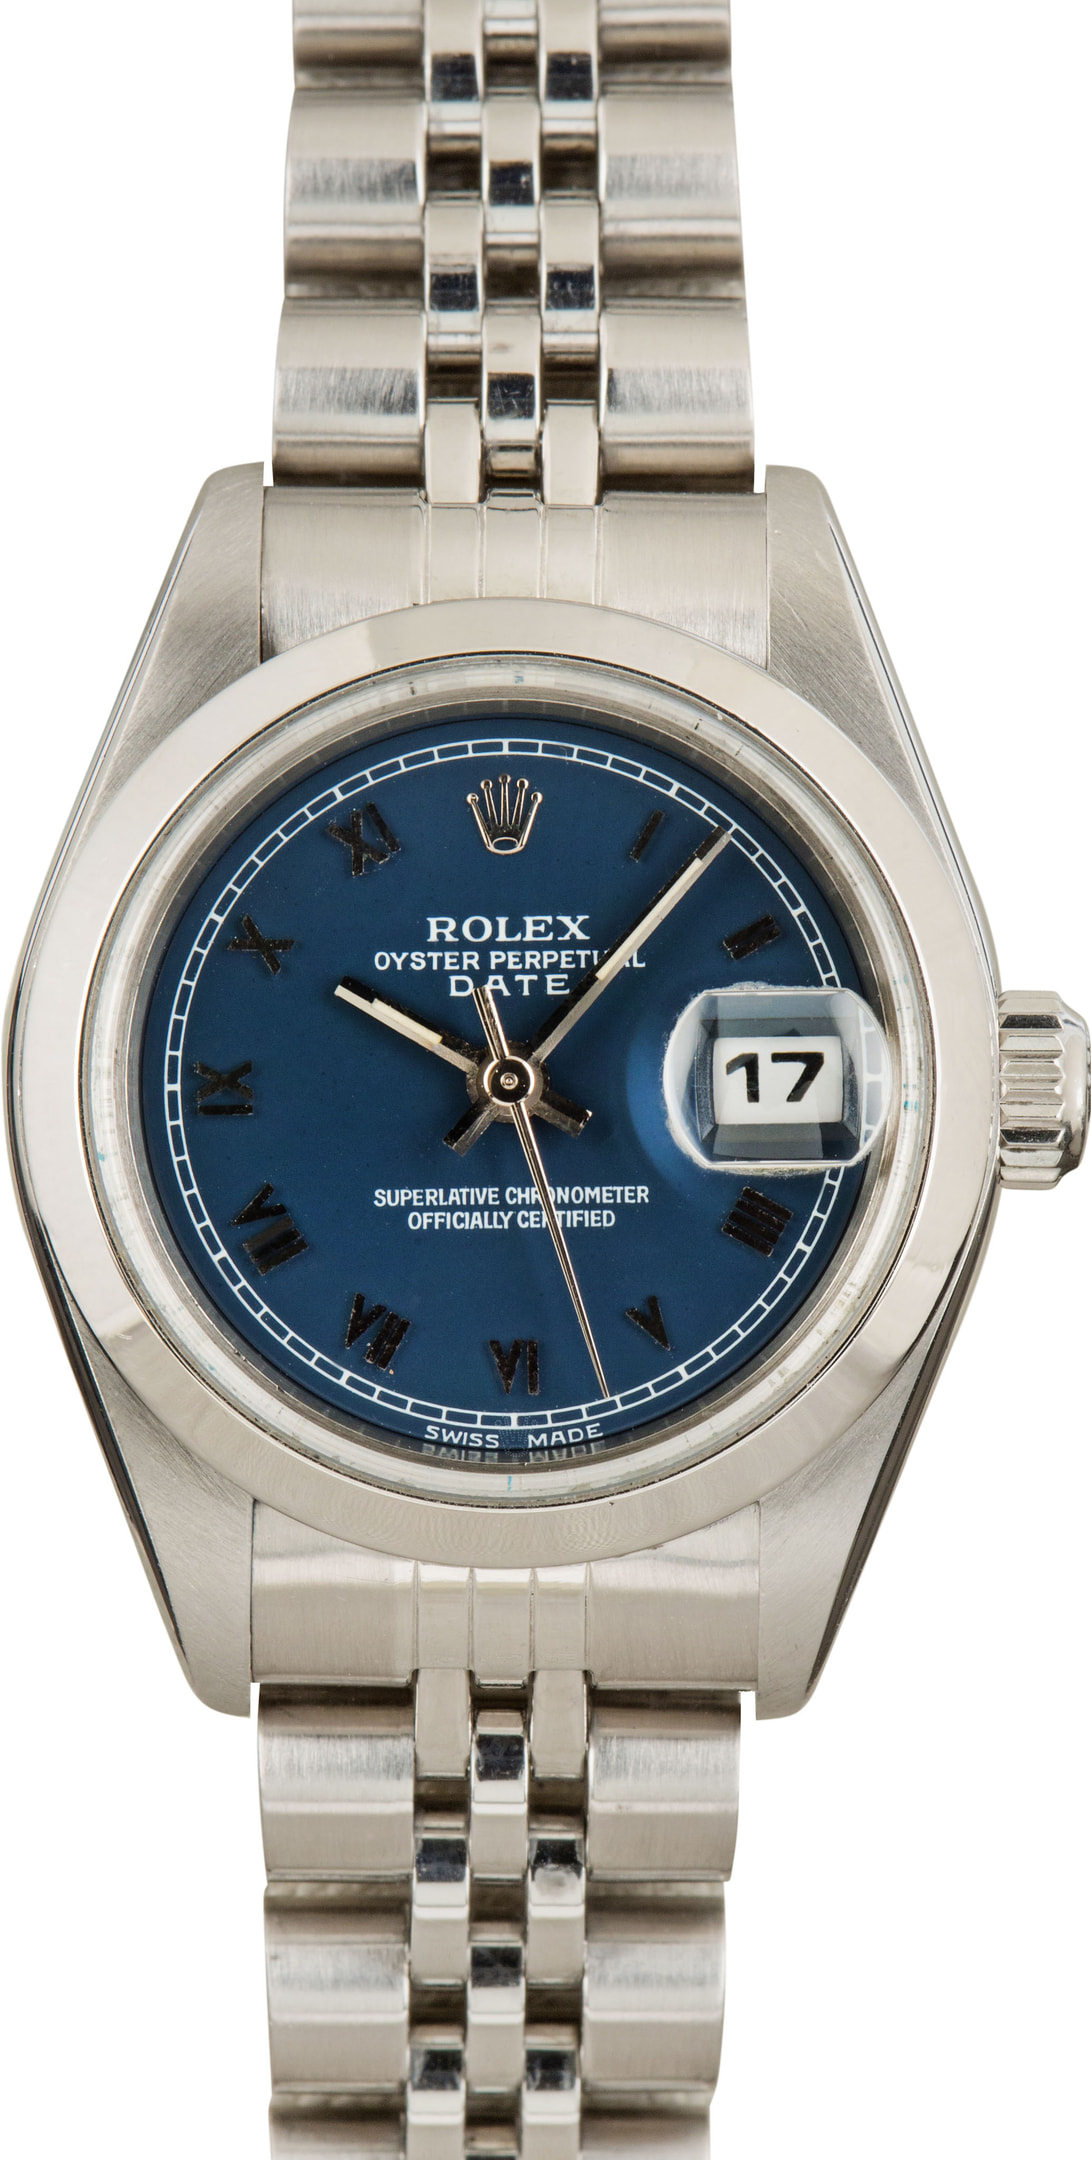 Buy Used Rolex Date 69160 | Bob's Watches - Sku: 164435